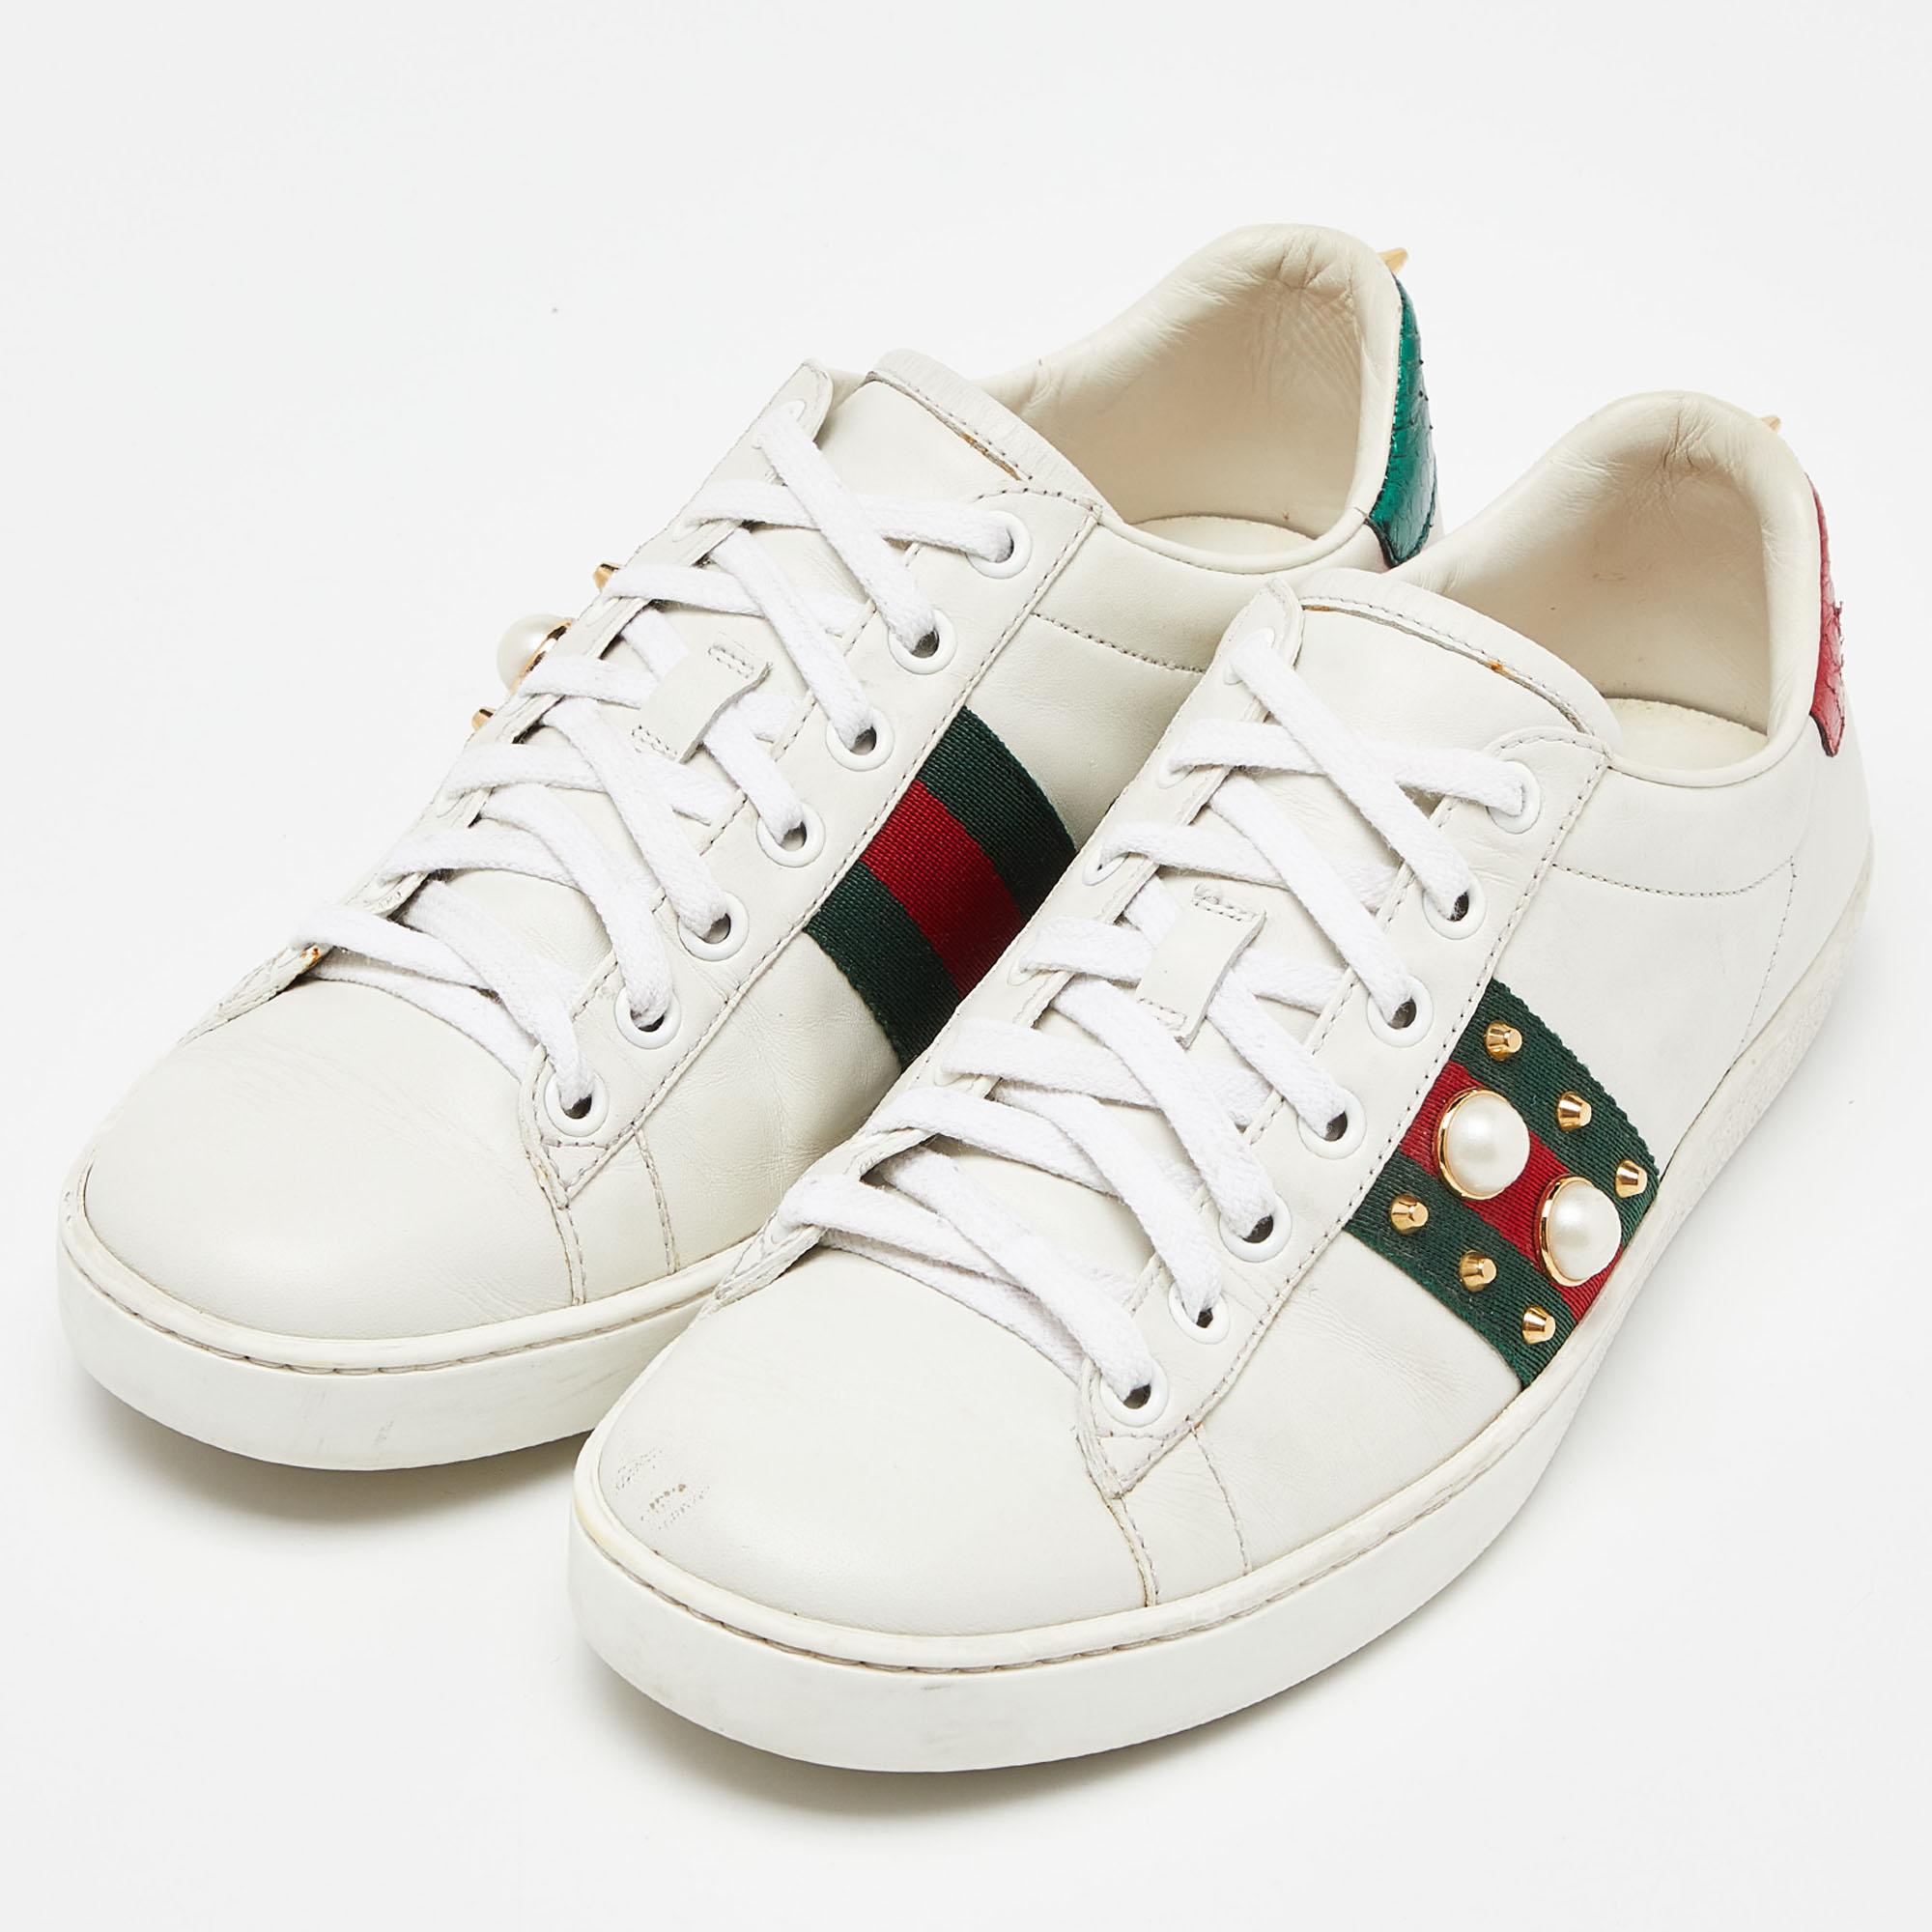 Gucci White Leather Faux Pearl and Spike Embellished Ace Sneakers Size 38 In Good Condition For Sale In Dubai, Al Qouz 2